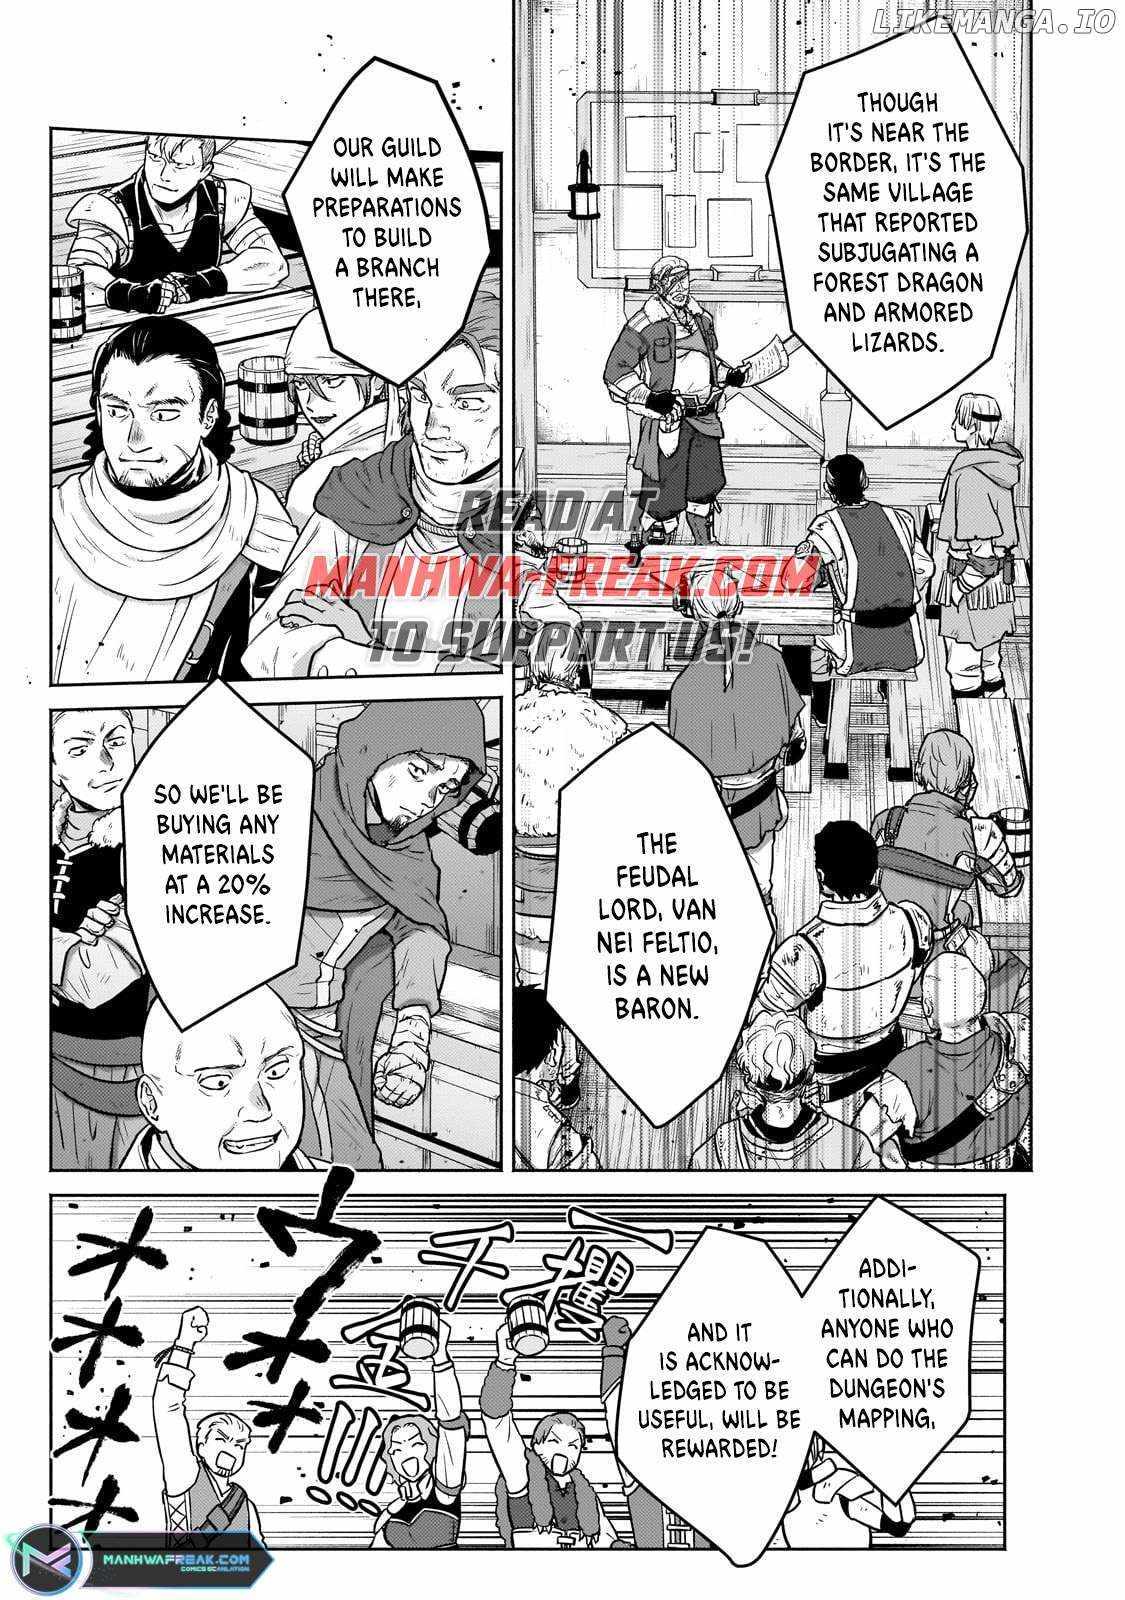 Fun Territory Defense By The Optimistic Lord Chapter 26-2 - Picture 1